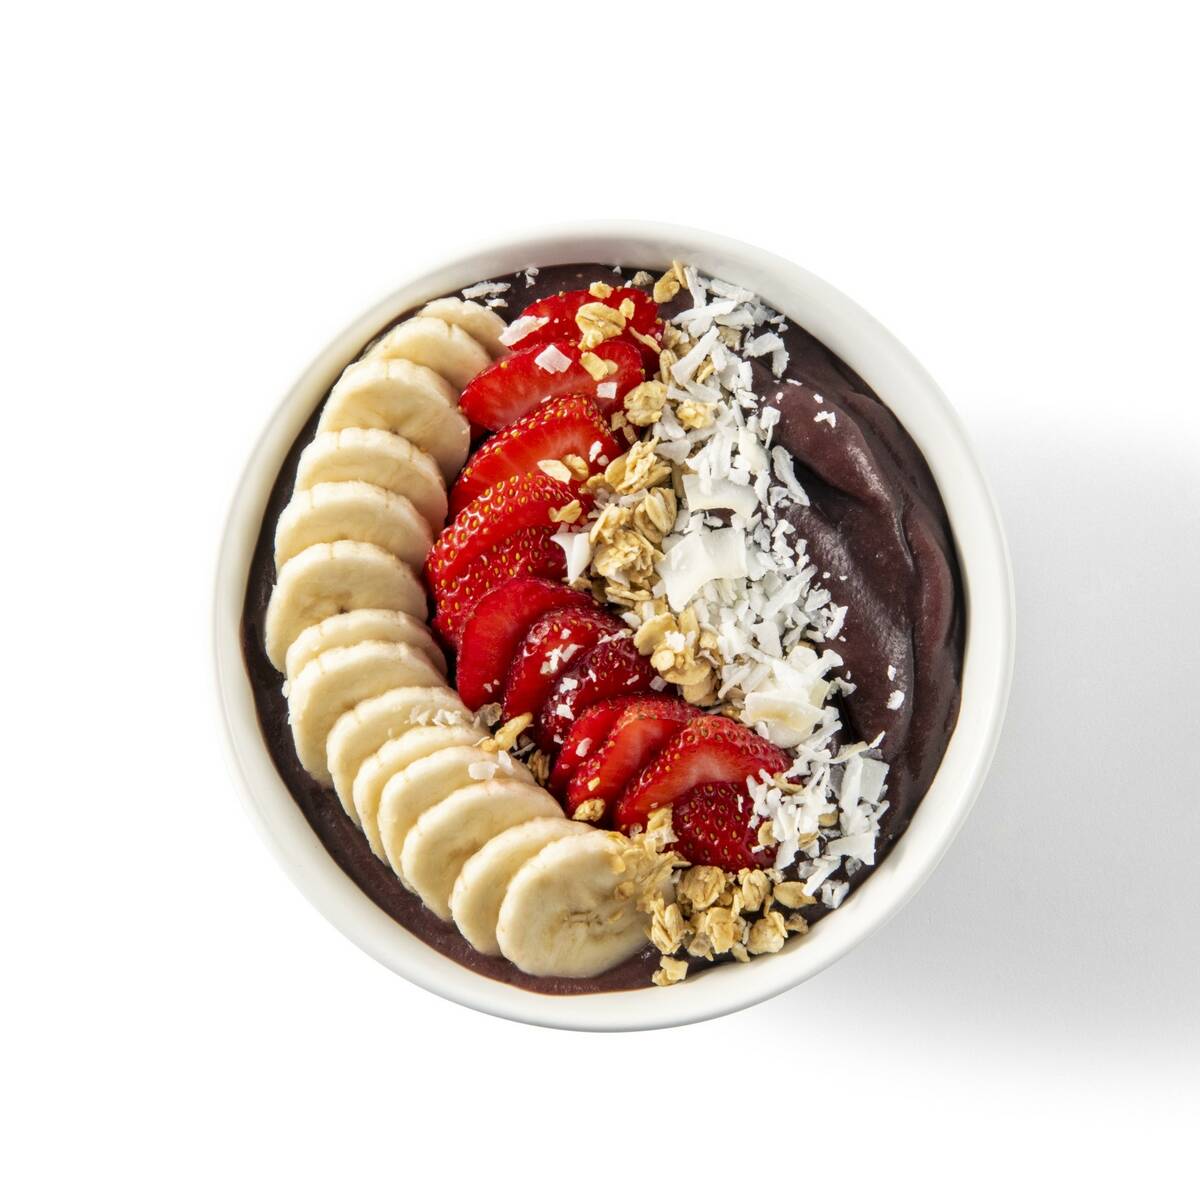 An açai bowl from PowerSoul Cafe on West Warm Springs Road in Las Vegas on Friday, Feb. 23, 20 ...